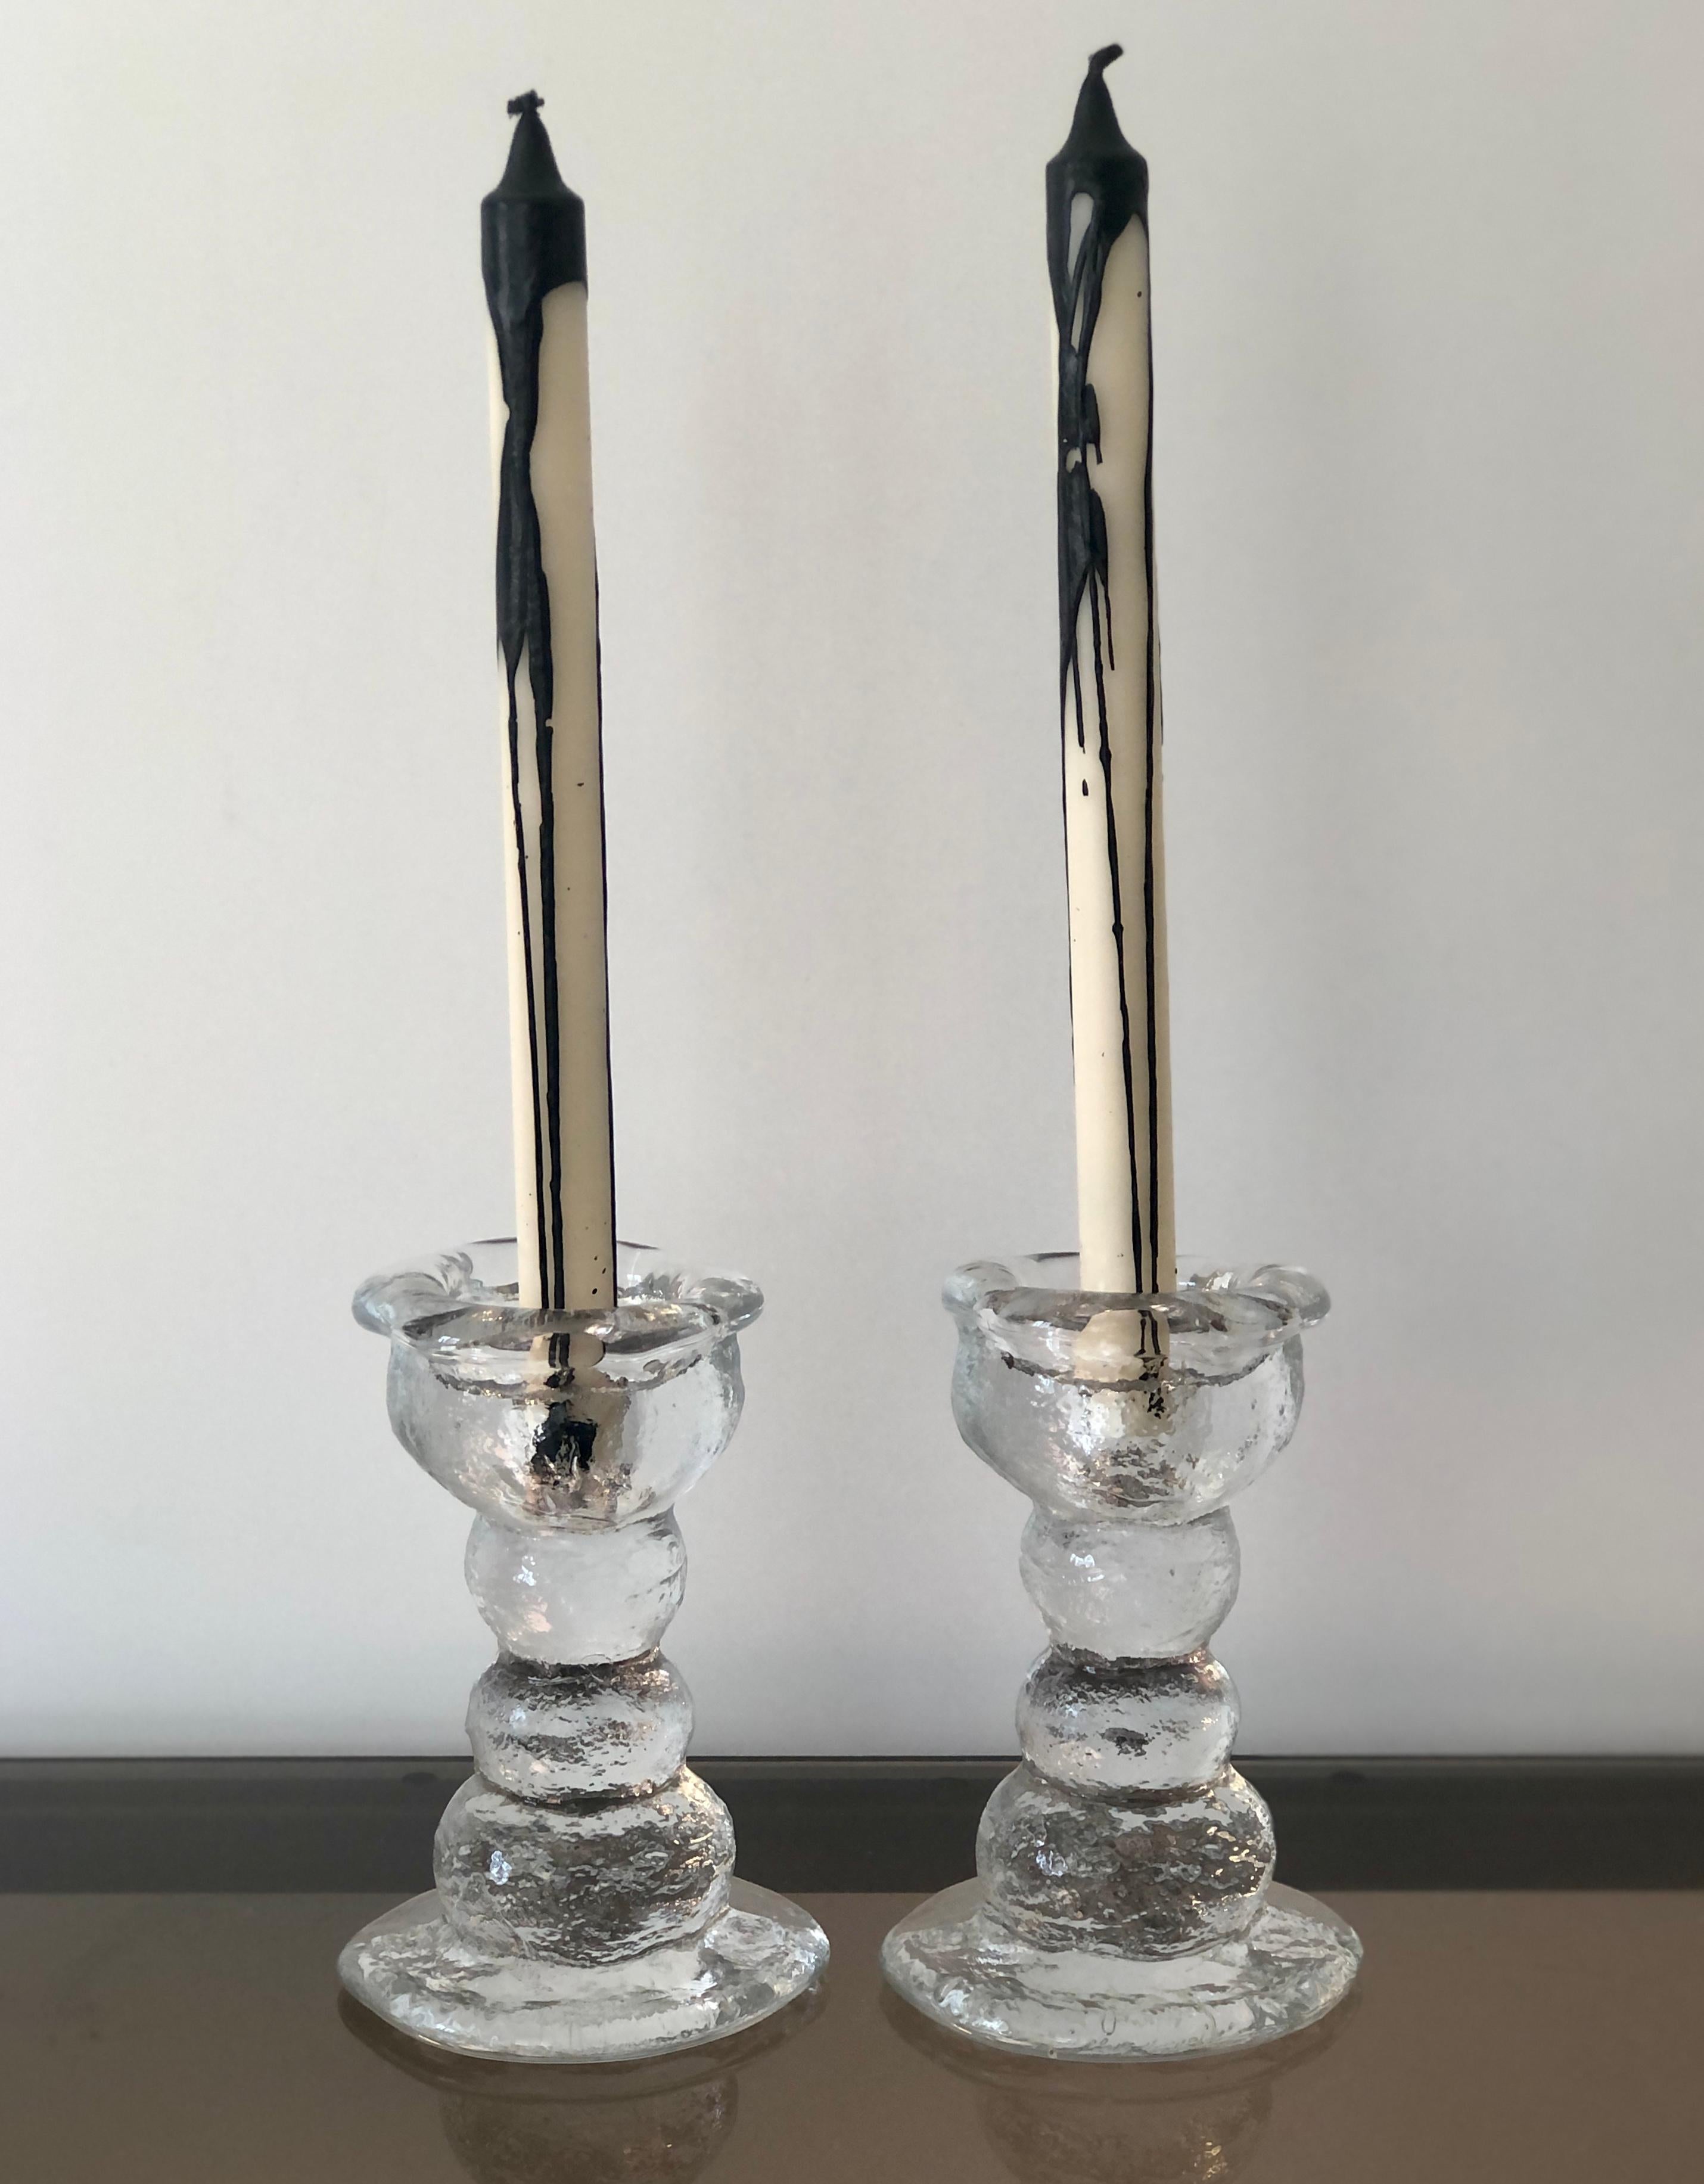 Molded 1970s Brutalist Candlesticks by Pertti Santalahti for Humppila, Finland For Sale